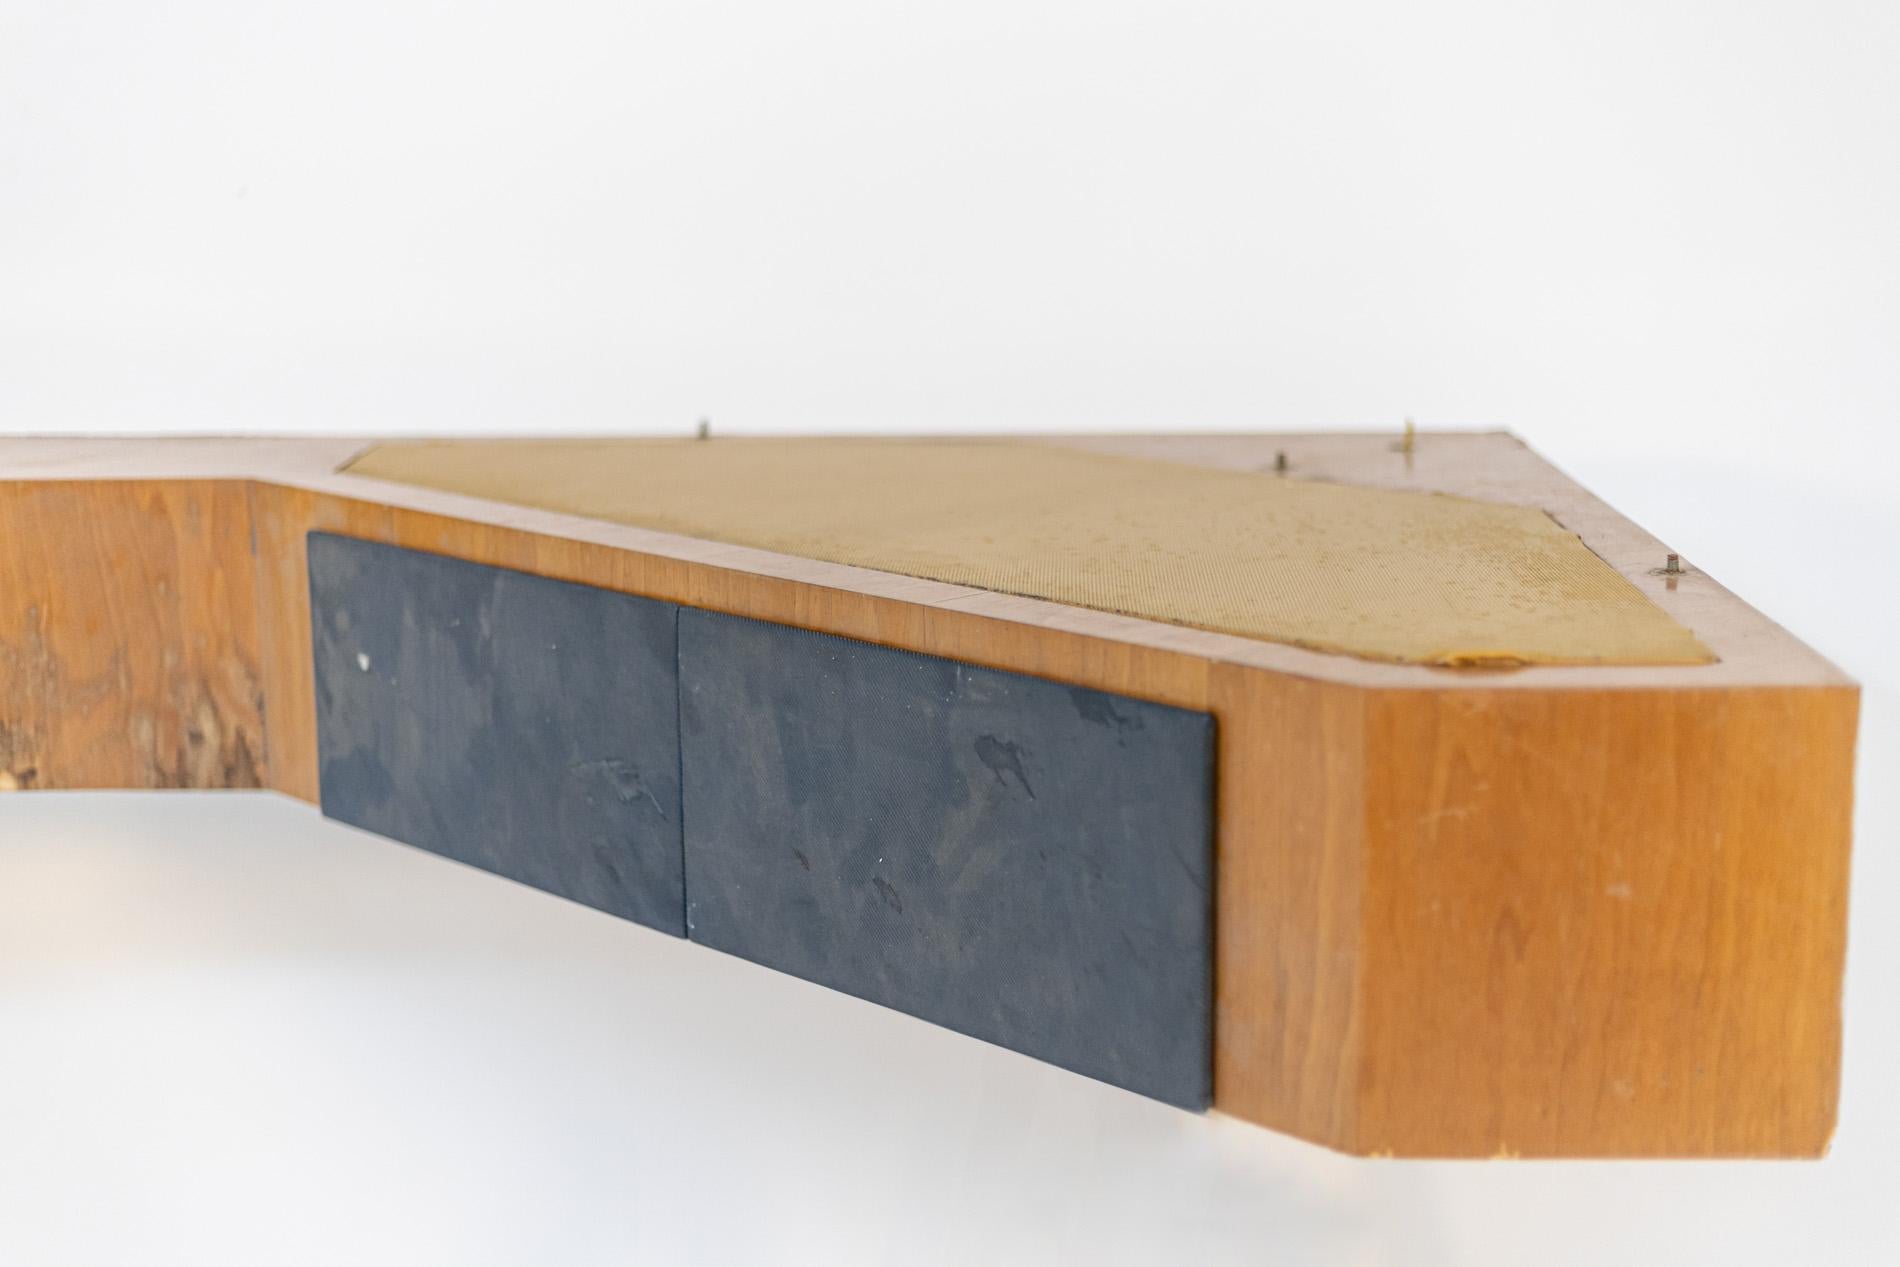 Large Italian console or wall shelf from the 1950s. The console is attributed to the great designer Melchiorre Bega because of its shape and line. The structure is made of walnut wood. The peculiarity of the console is its large protrusion of